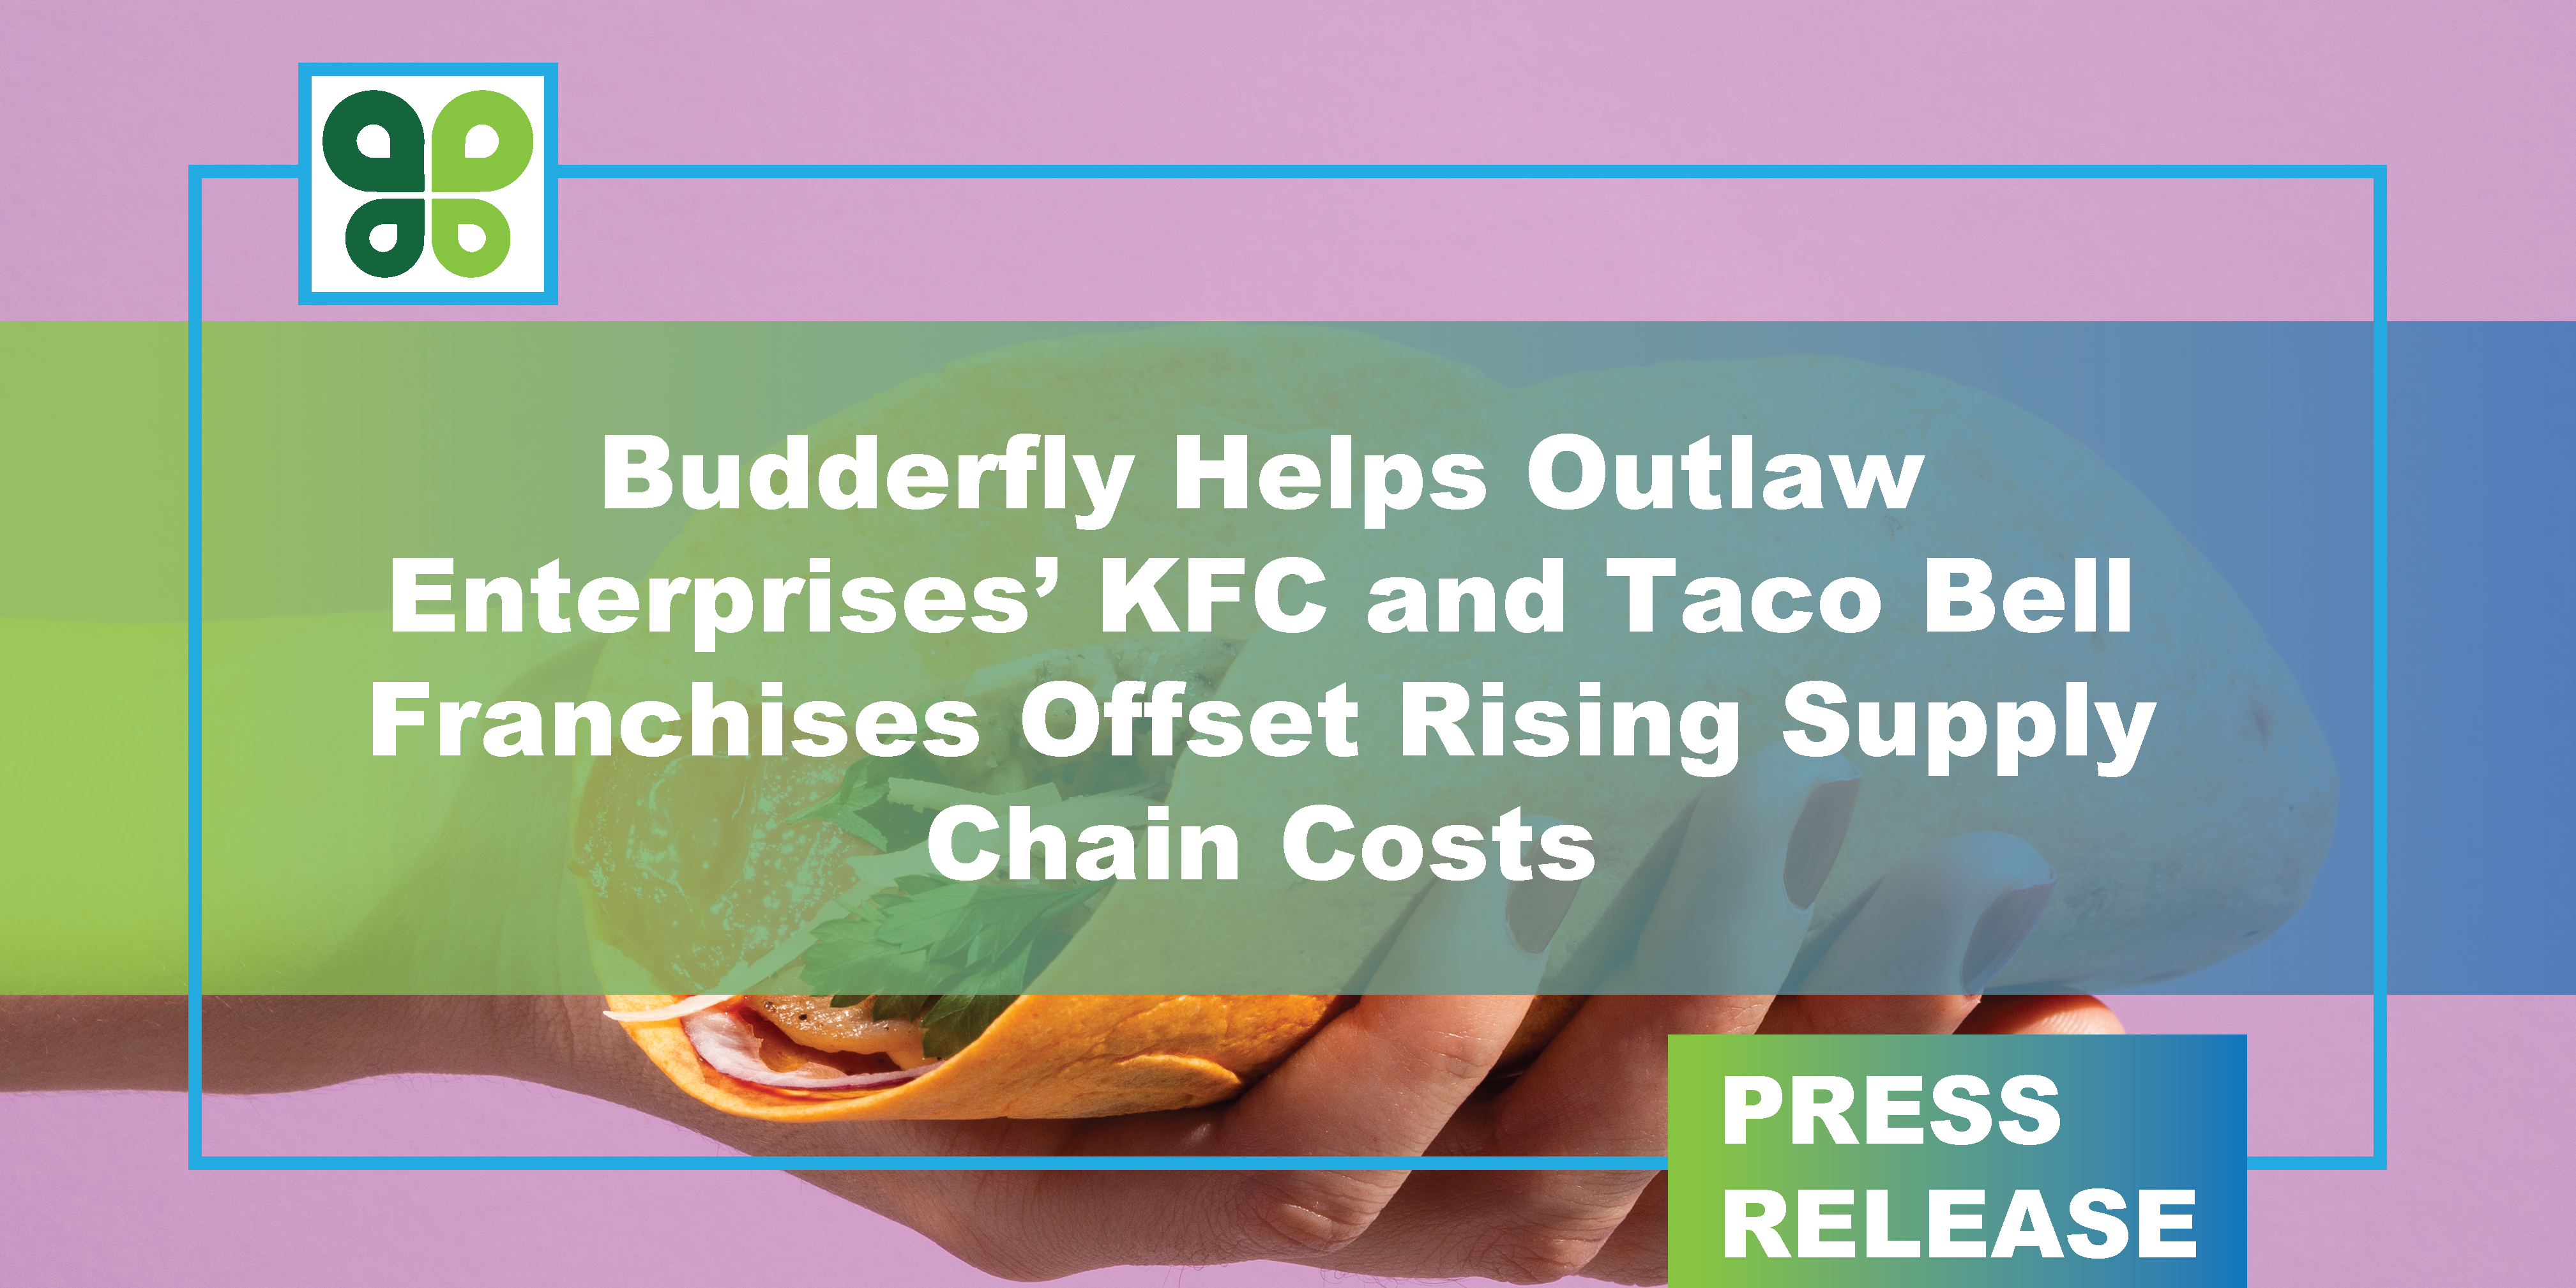 Budderfly Helps Outlaw Enterprises' KFC and Taco Bell Franchises Offset Supply Chain Costs